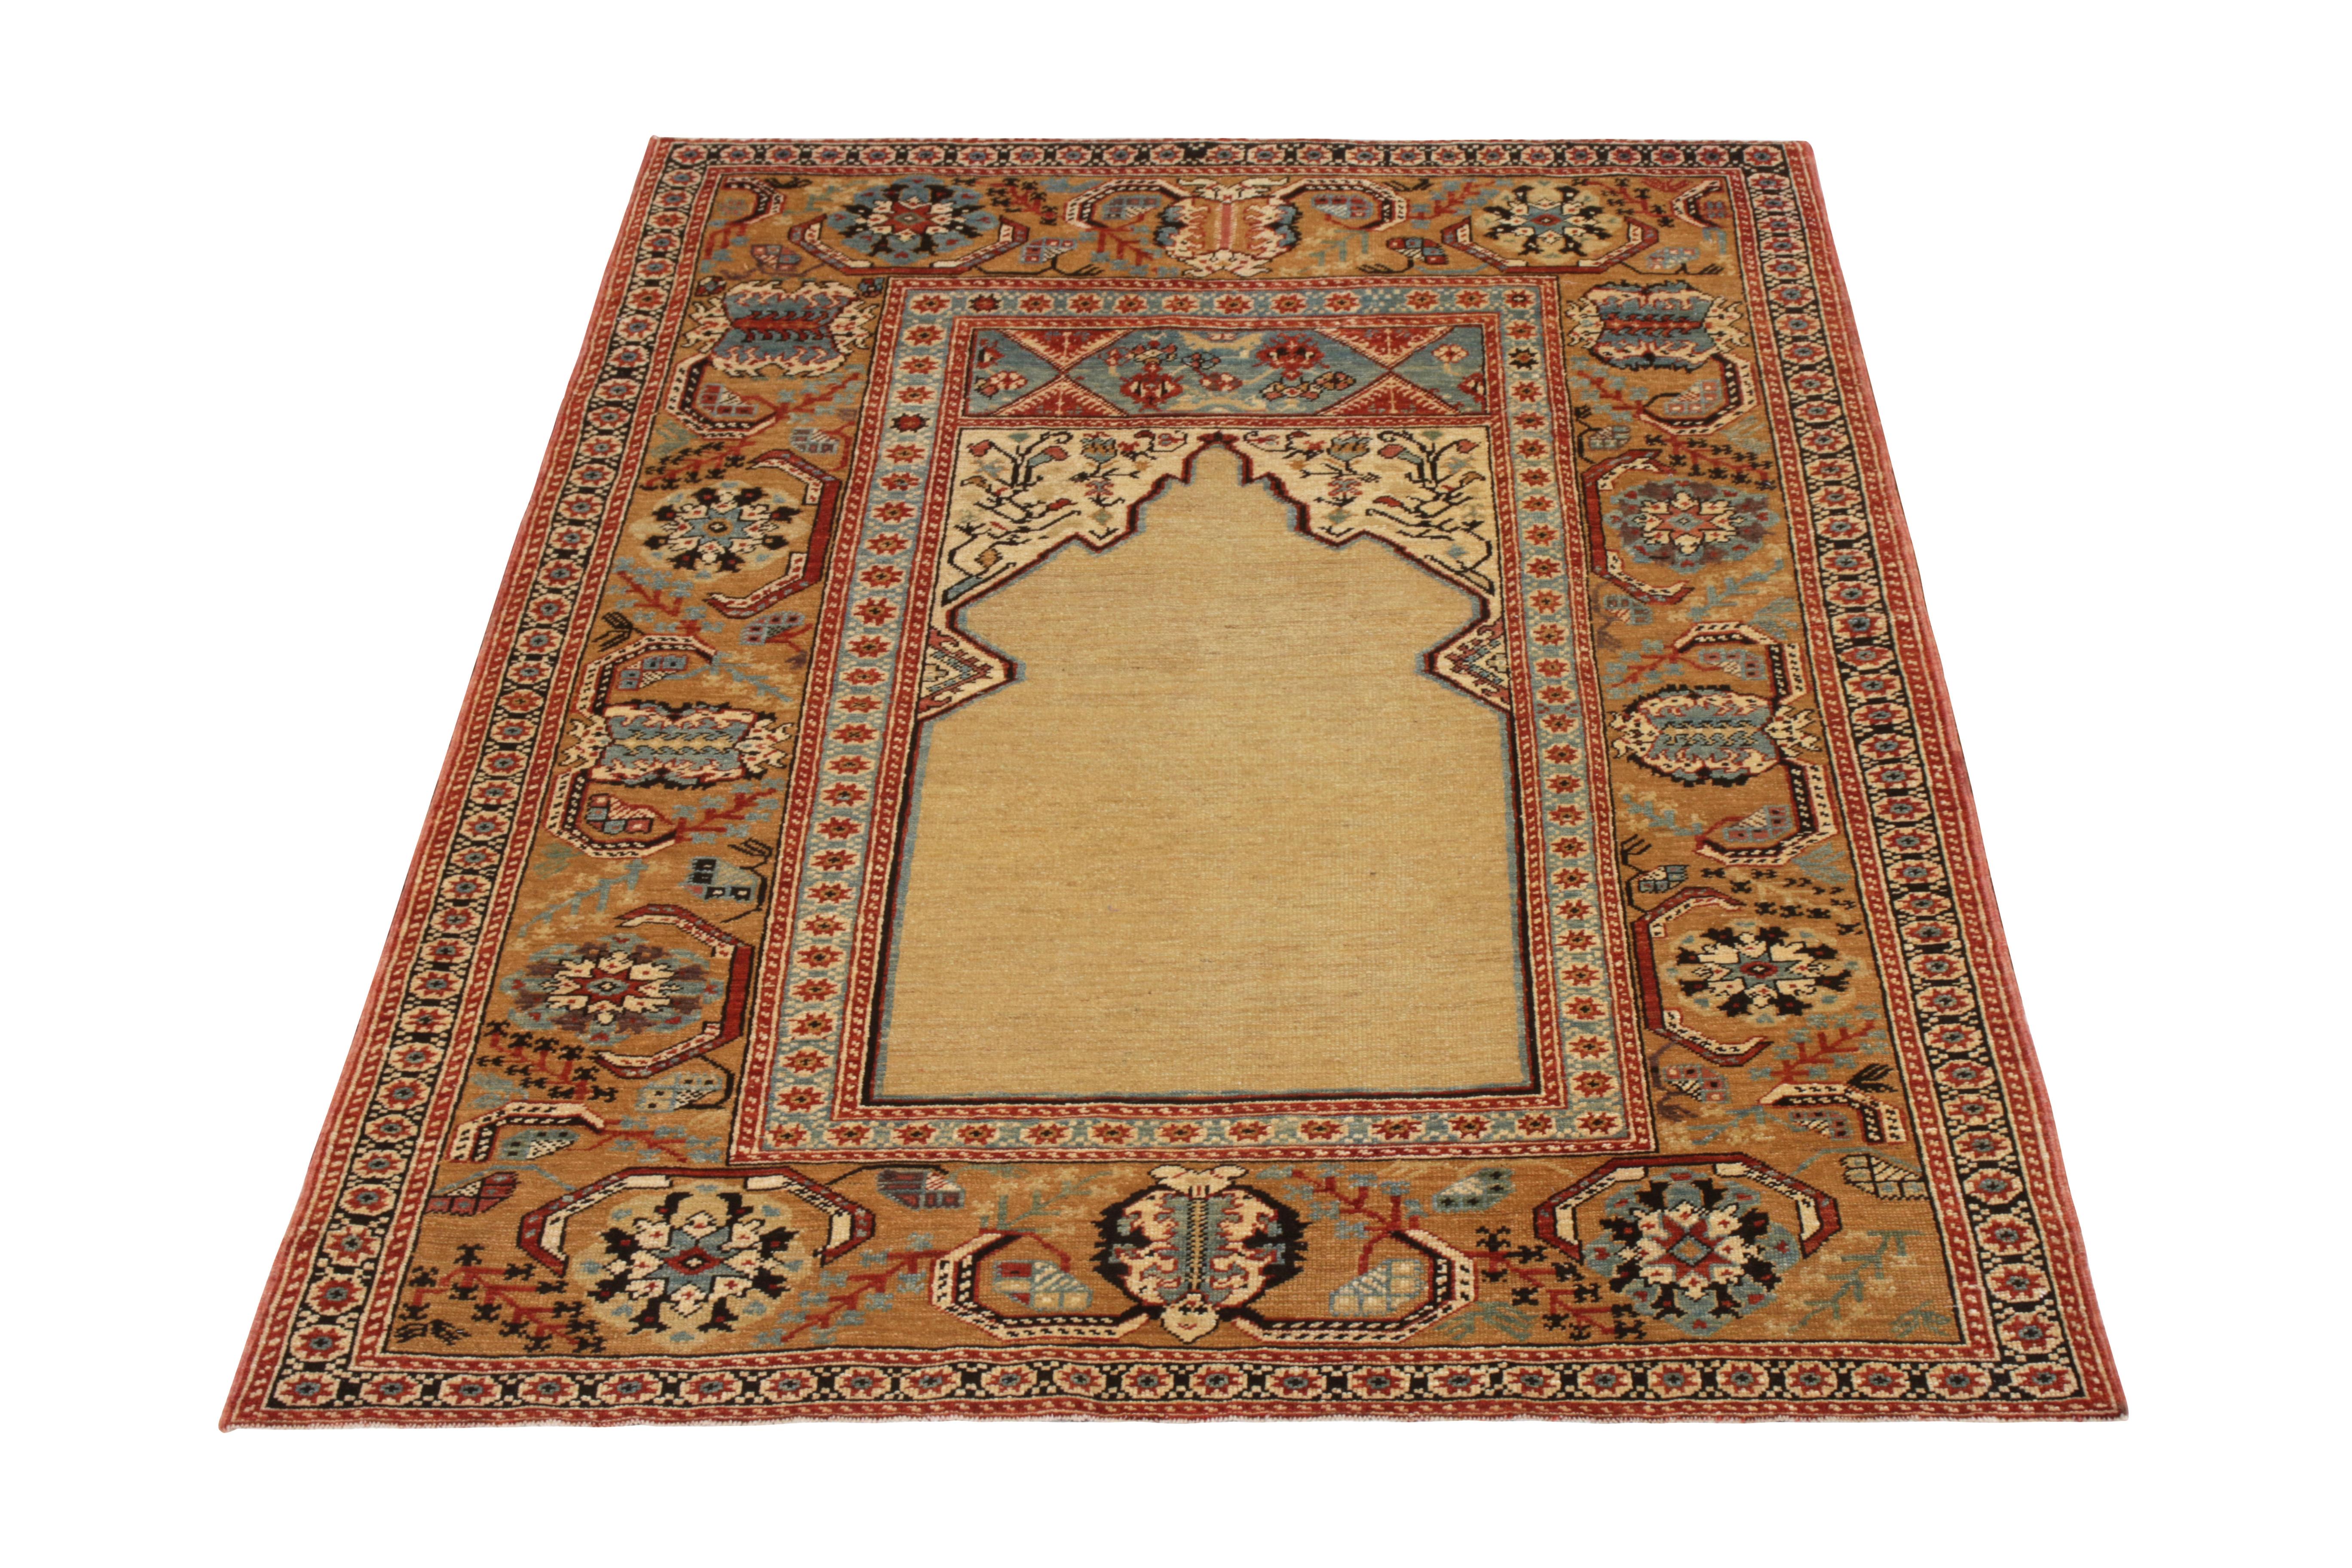 A 4x5 mode to 19th-century rug styles in beige and gold from Rug & Kilim’s Modern Classics collection. Hand-knotted in wool, an exemplary modern piece from the works of George Ravmamovich, recapturing regal floral patterns. 

On the design: This